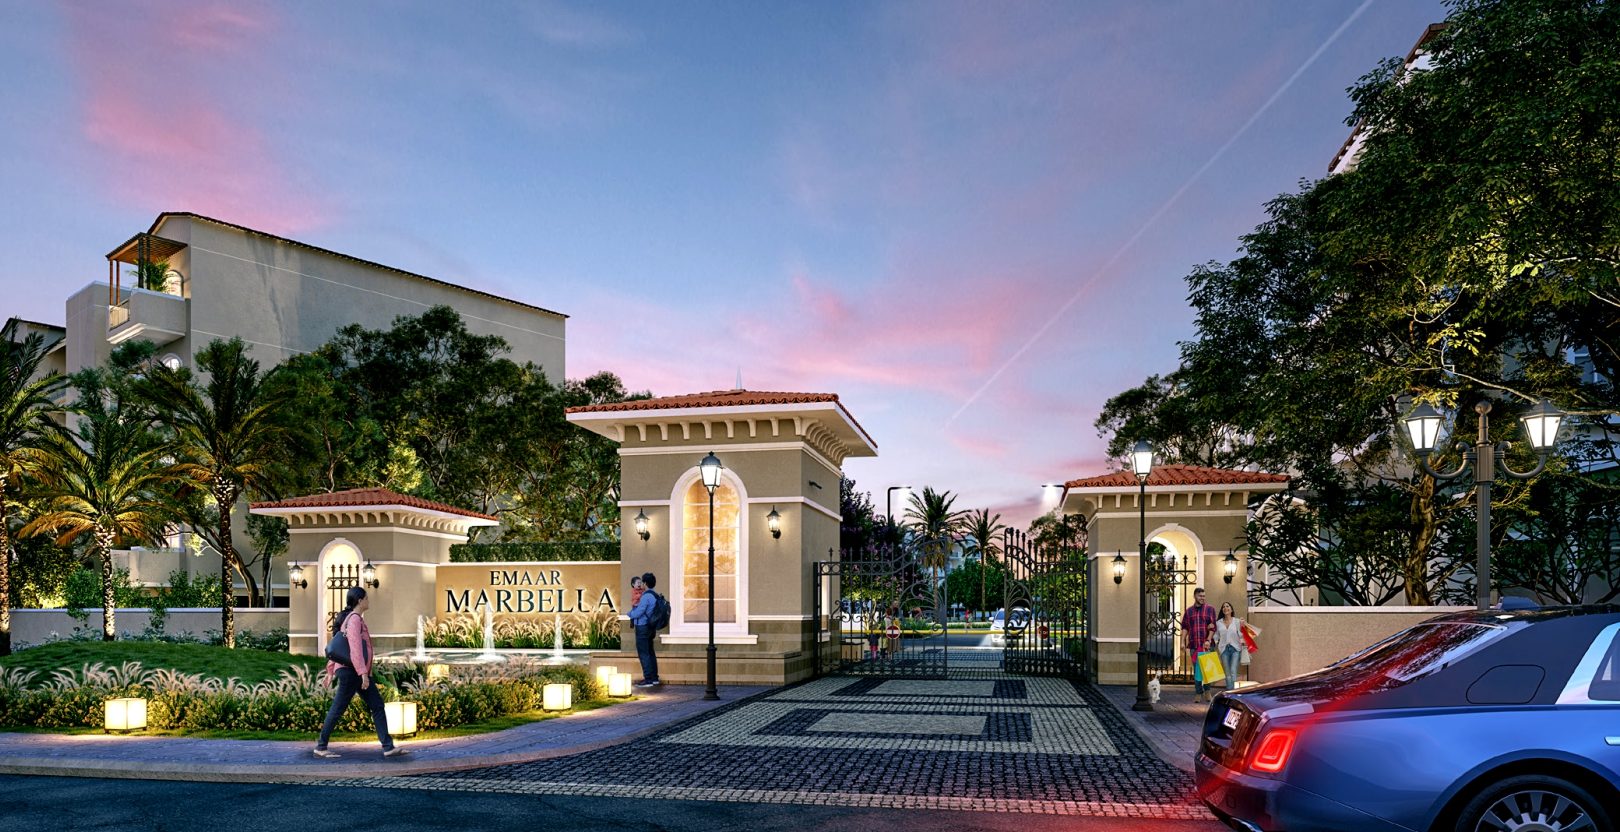 At the Gurgaon-based Emaar Marbella Villas, a Luxurious Lifestyle is Awaiting